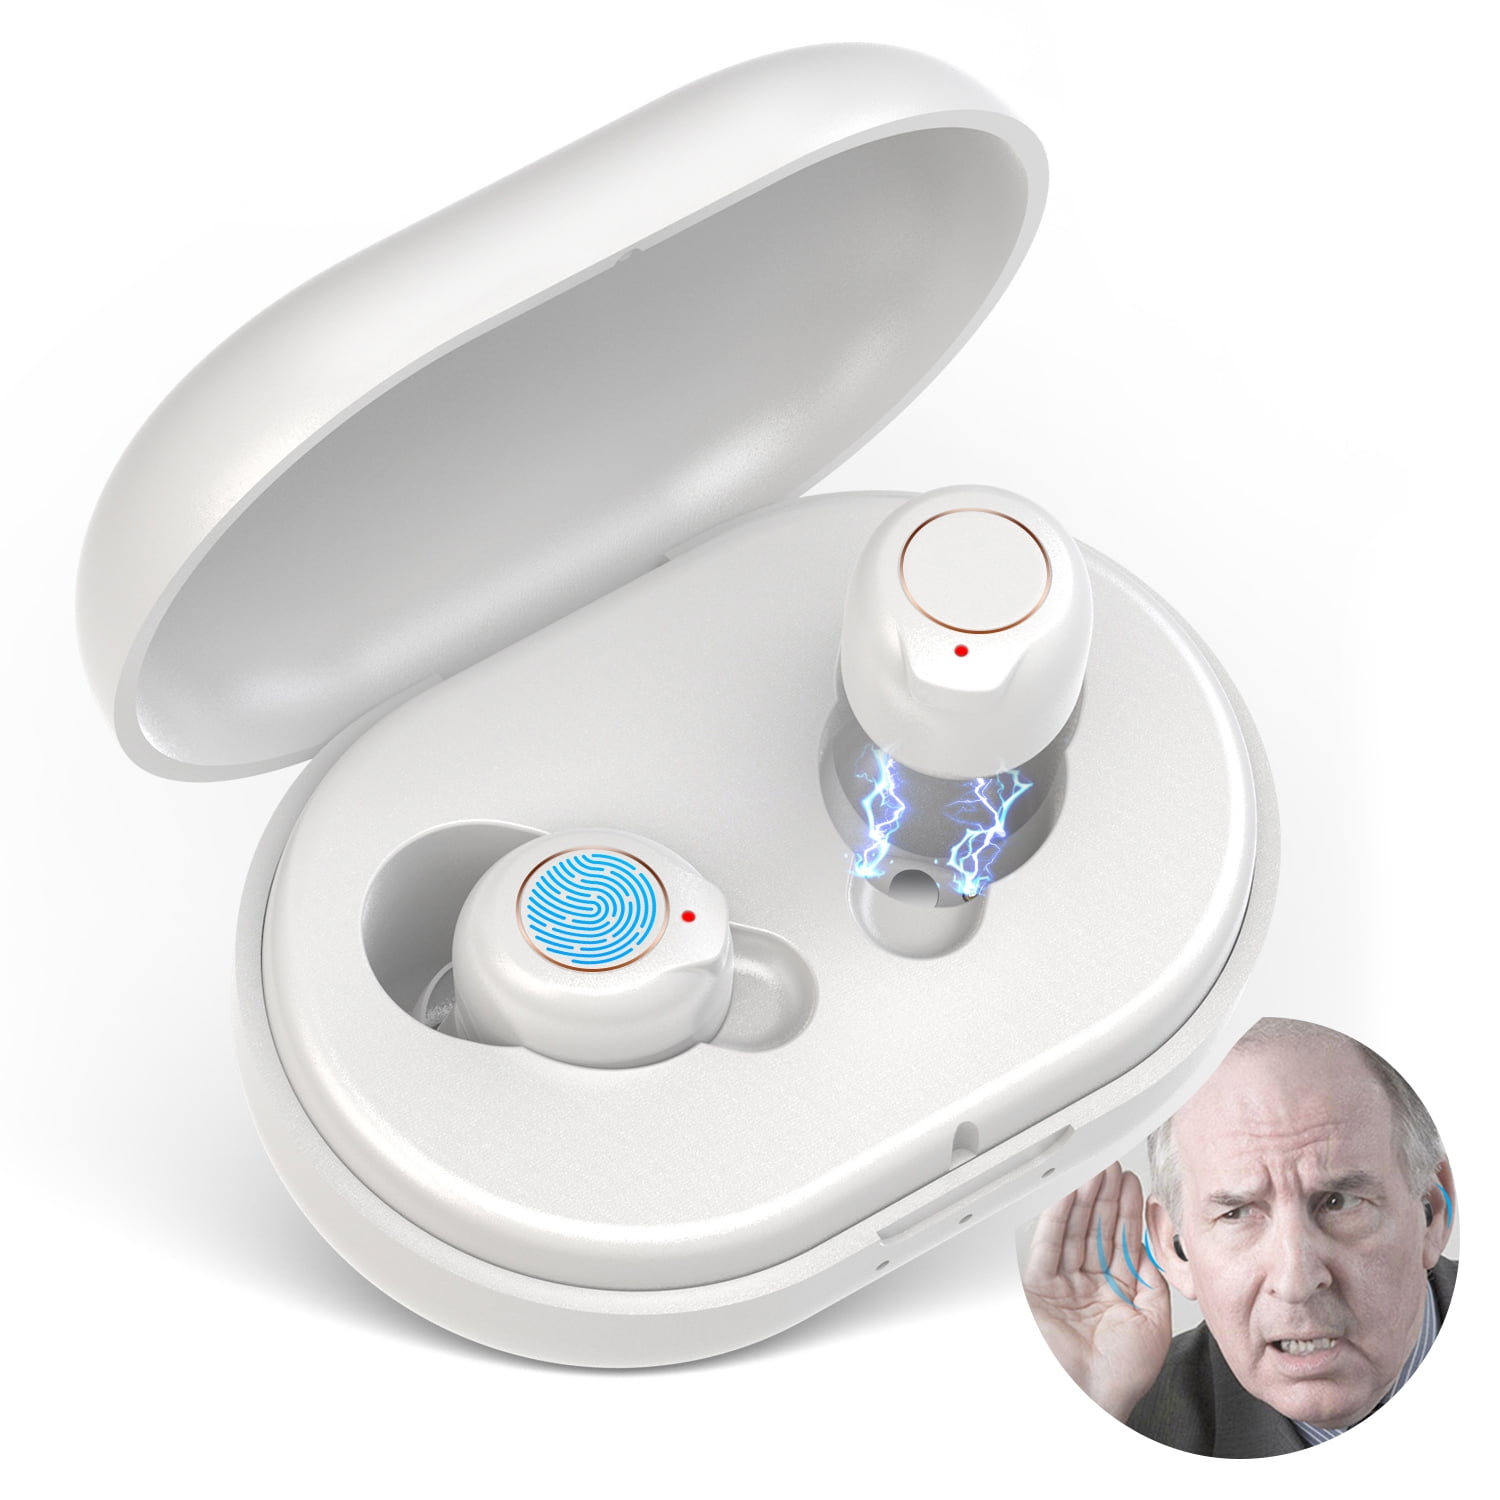 Digital Hearing Amplifier Amplifier Wireless Invisible Adjustable Tone Elderly Hearing Aid Elderly Best Sound Hearing Aids Aid for Suitable For Left and Right Ear Wear 2 Batteries 